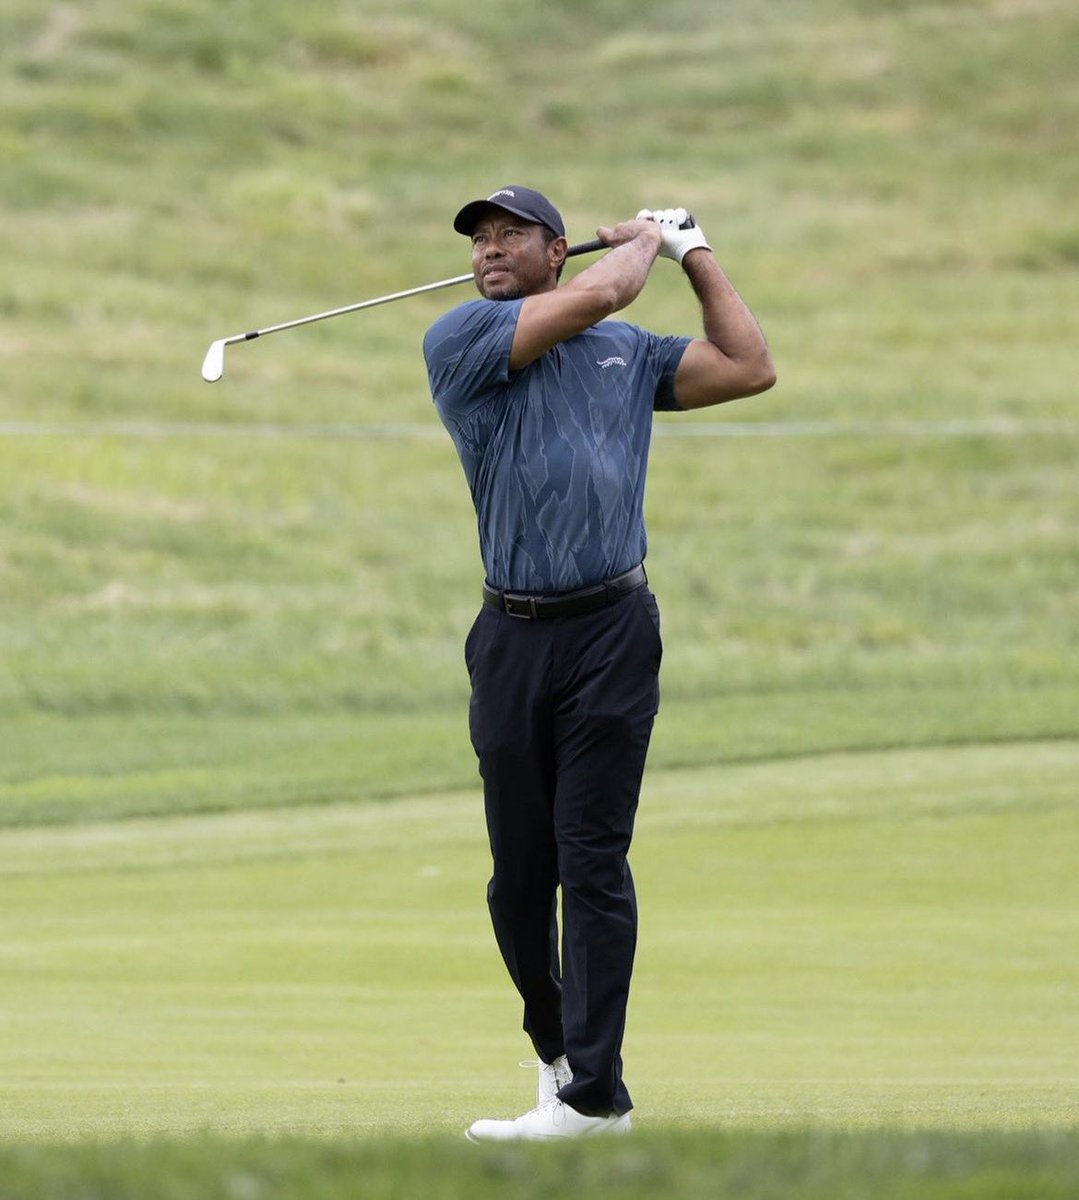 Tiger Woods allegedly shot a 62 in his practice round at Valhalla 👀